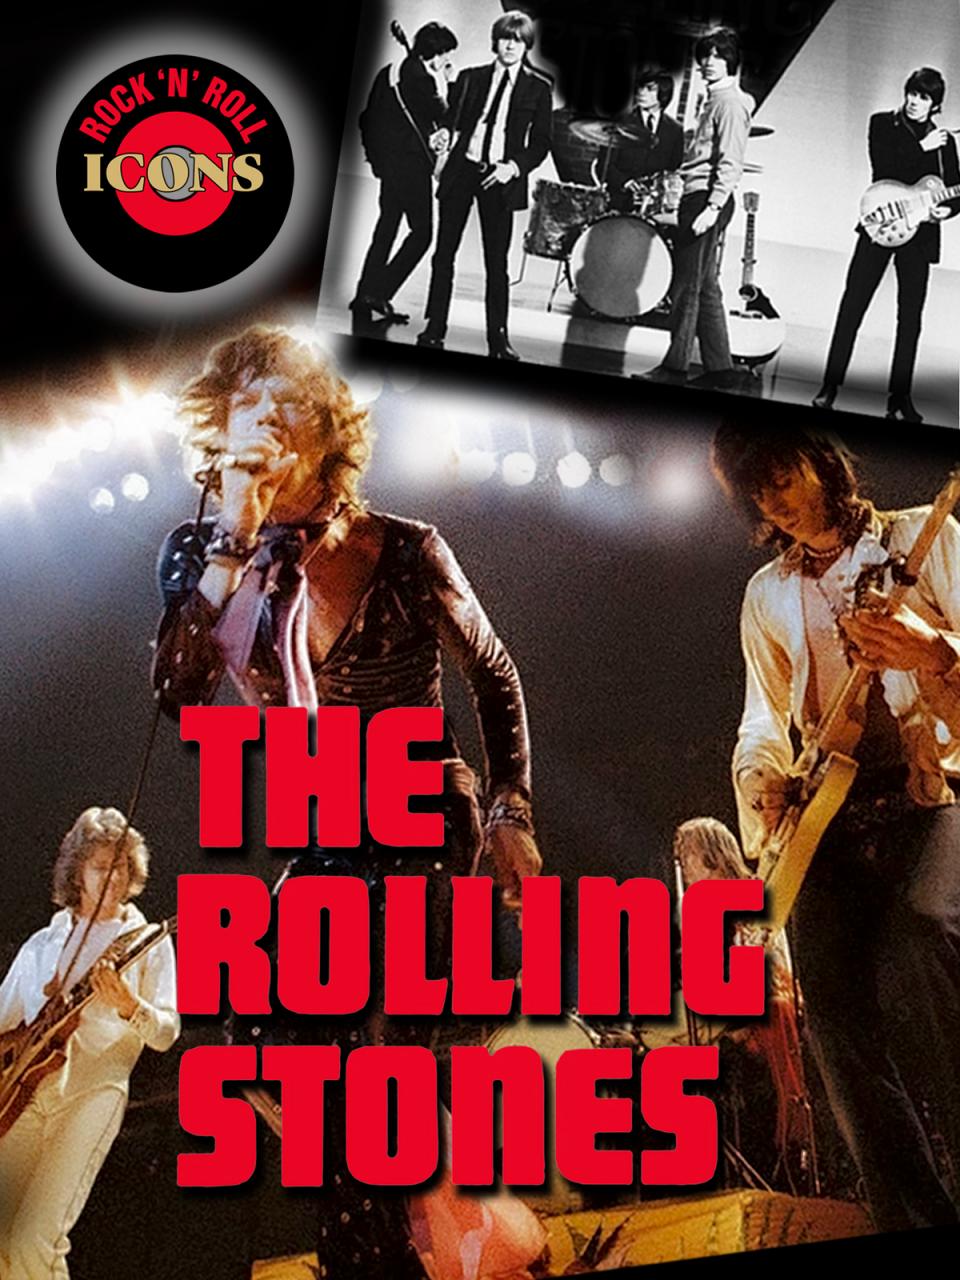 Rock 'n Roll Icons: The Rolling Stones